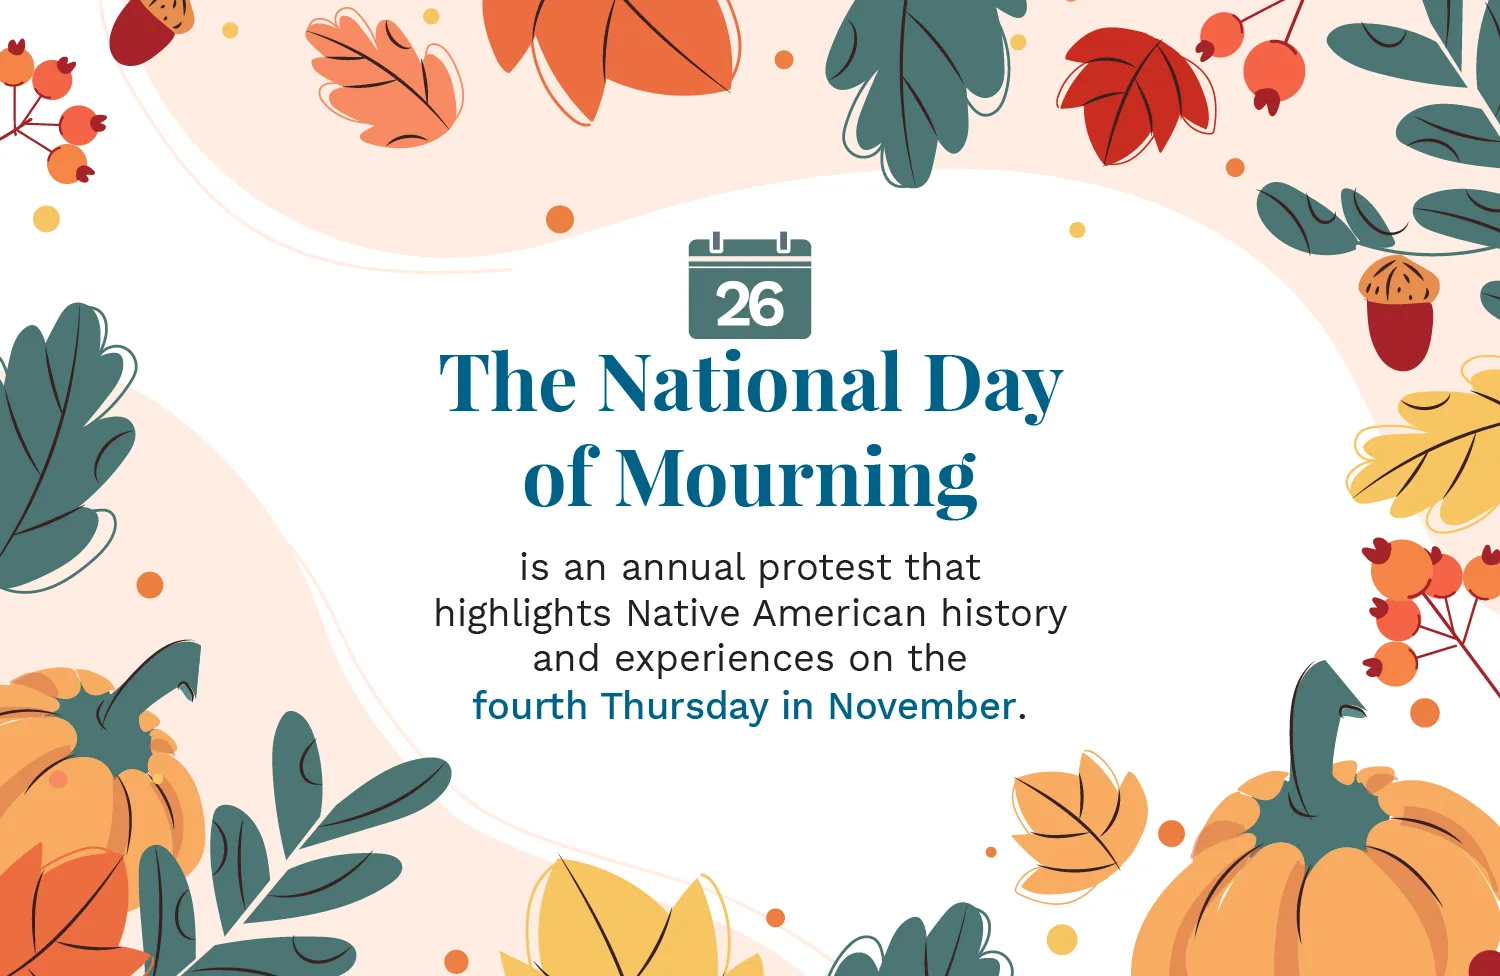 National Day of Mourning: What is Unthanksgiving Day?